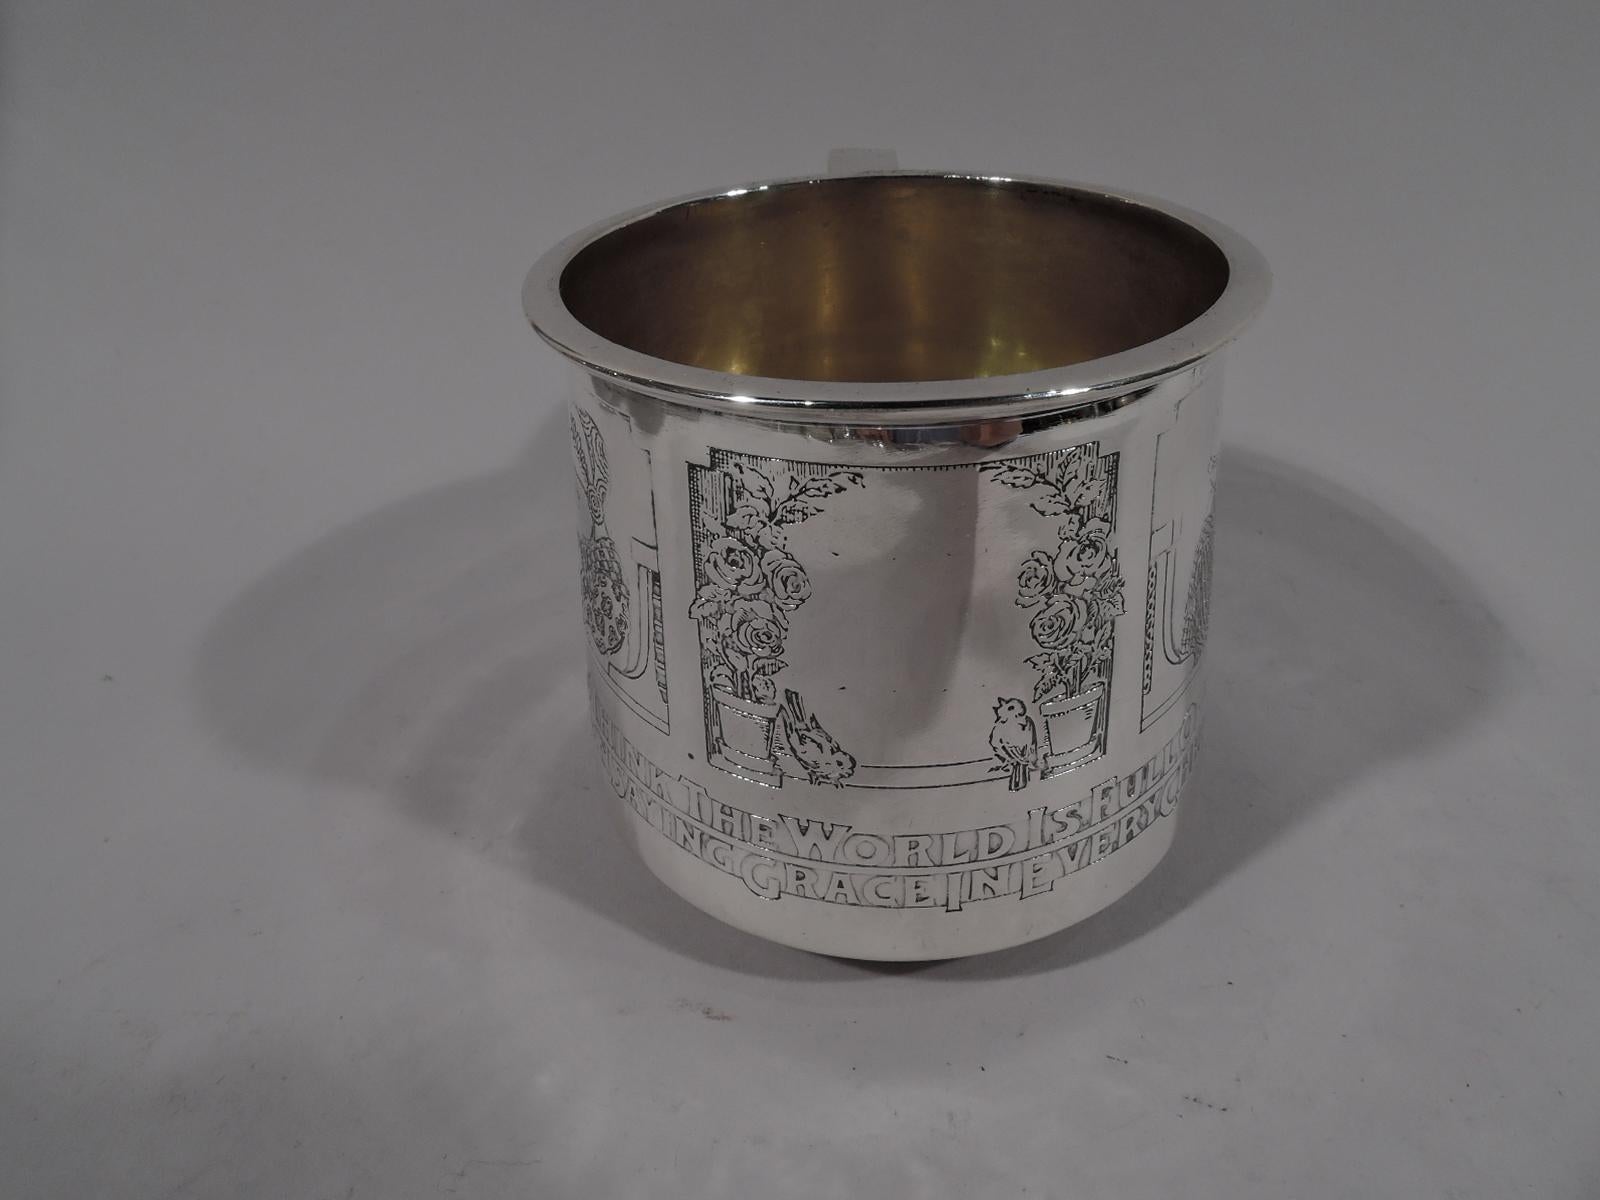 Edwardian Sterling silver baby cup. Made by Gorham in Providence, circa 1910. Gently upwards tapering sides, scrolled bracket handle, and flat rim. Gilt-washed interior. Two acid-etched frames with little girls from around the world (each in